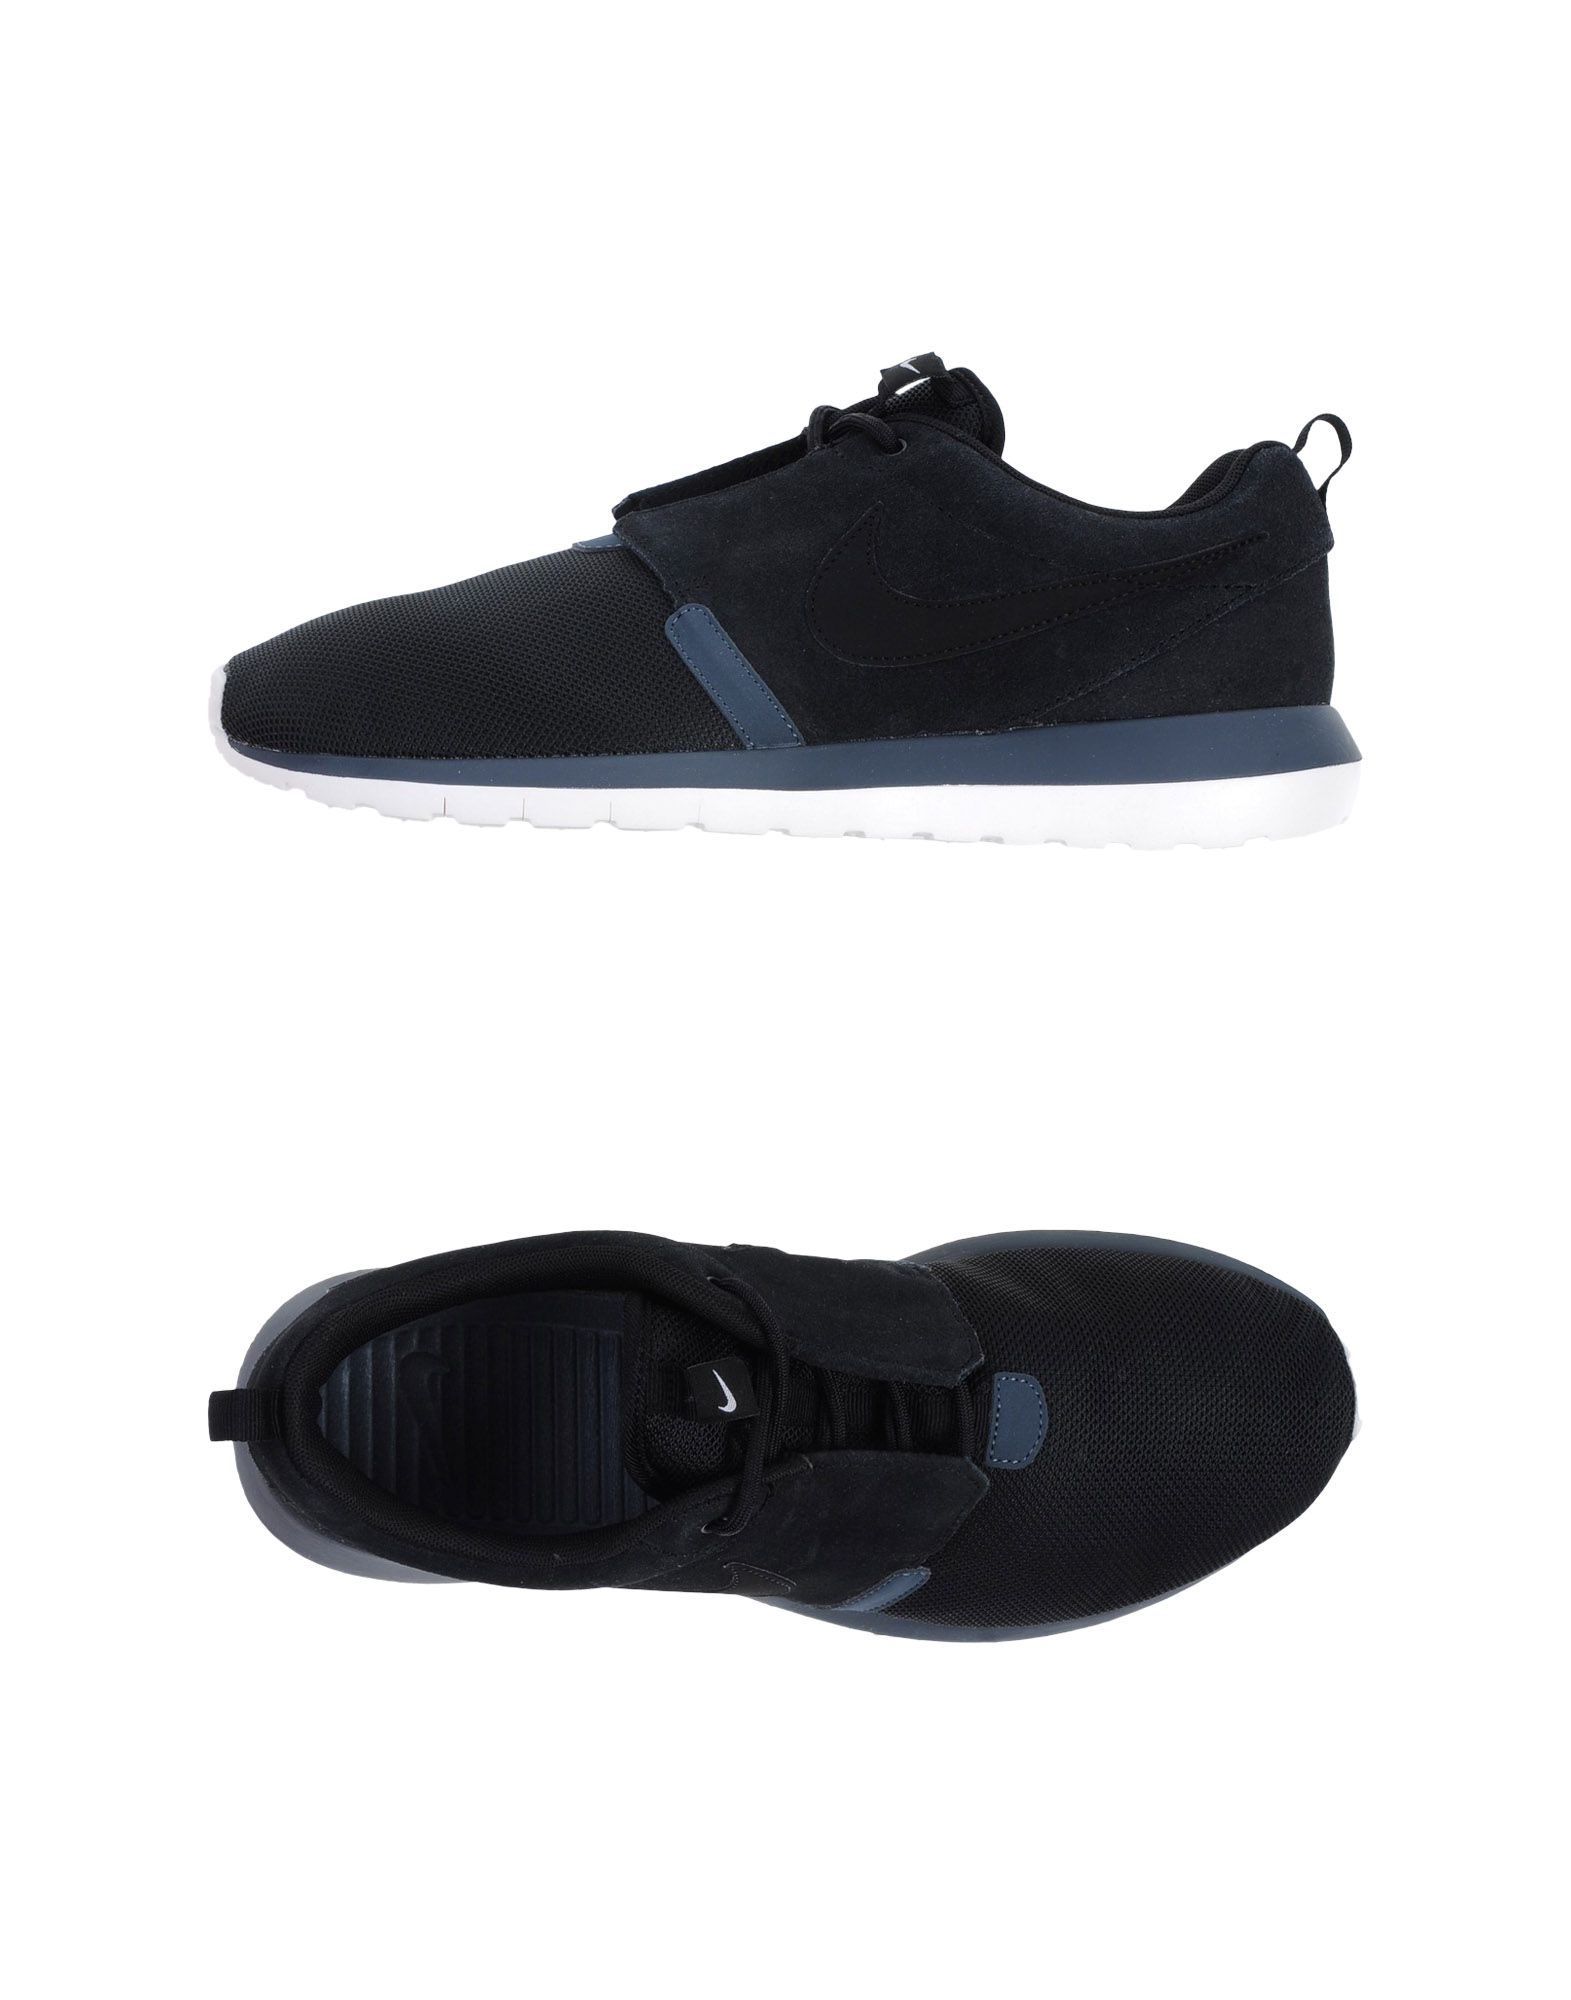 Nike Low-Tops & Trainers in Black for Men